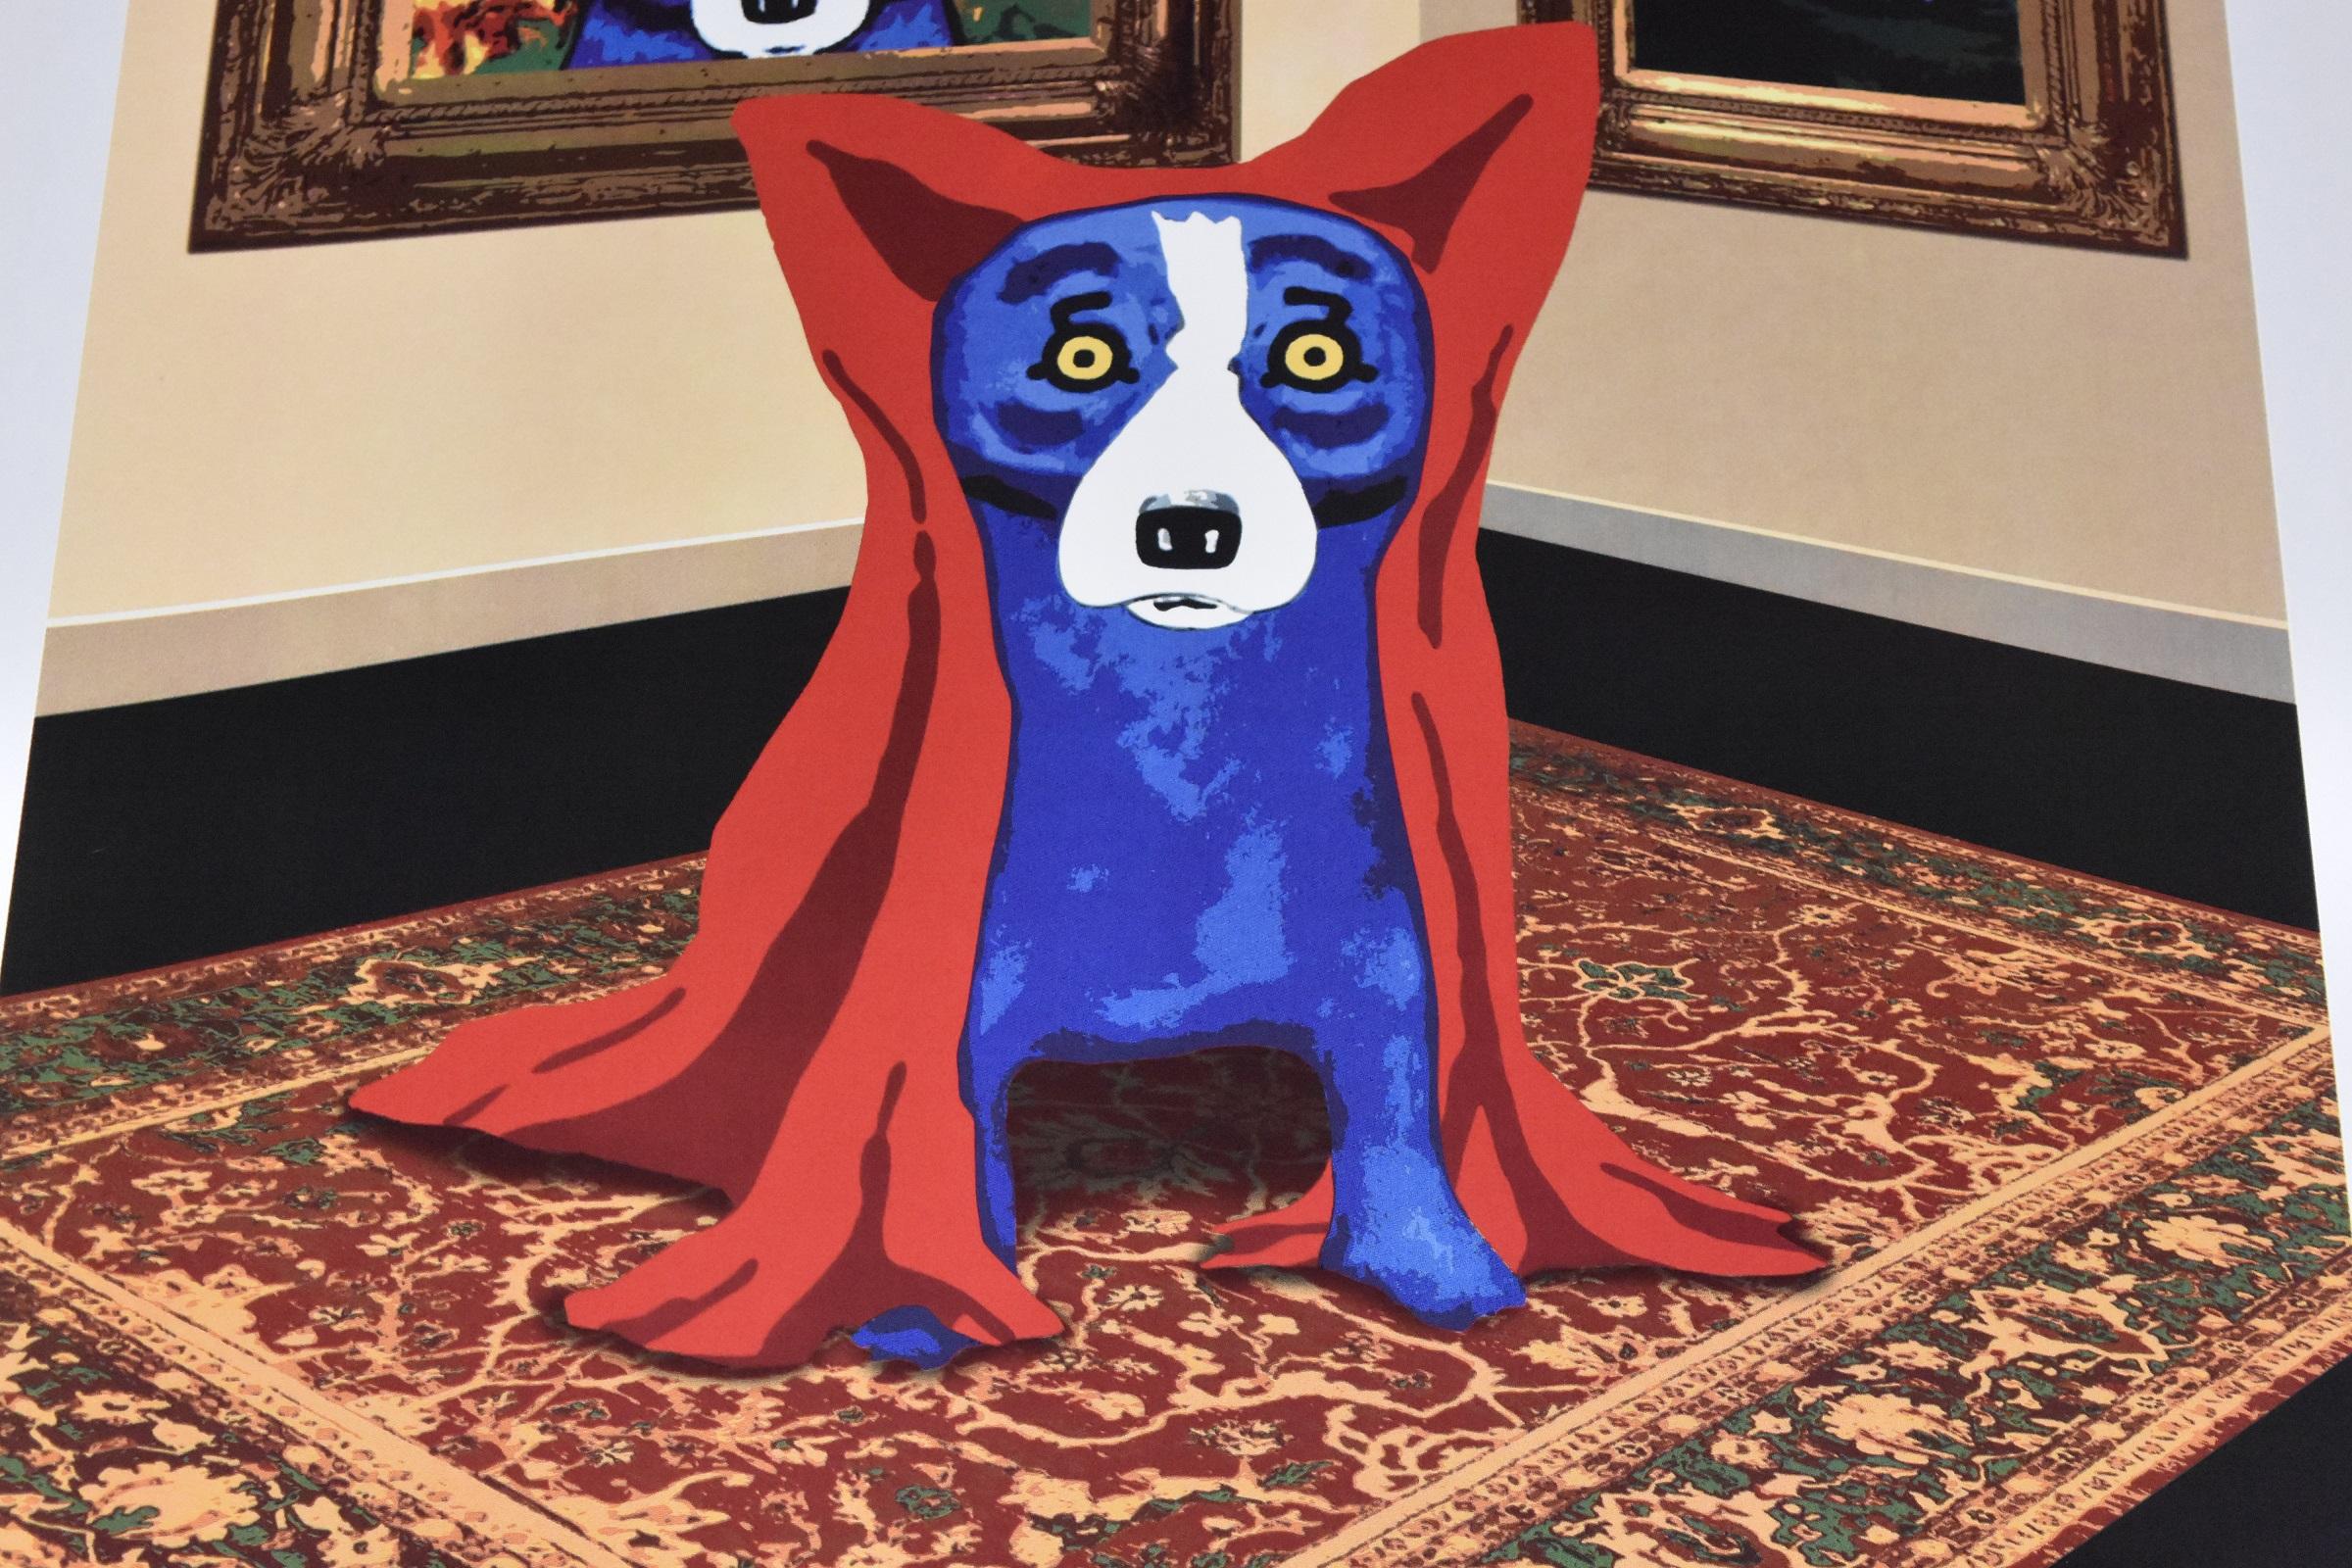 This Blue Dog work consists of a blue dog wearing a red blanket over himself sitting on a multi-colored carpet in a room with two Blue Dog portraits hanging on a beige wall. This print was made for the opening of his new New Orleans Gallery. All the